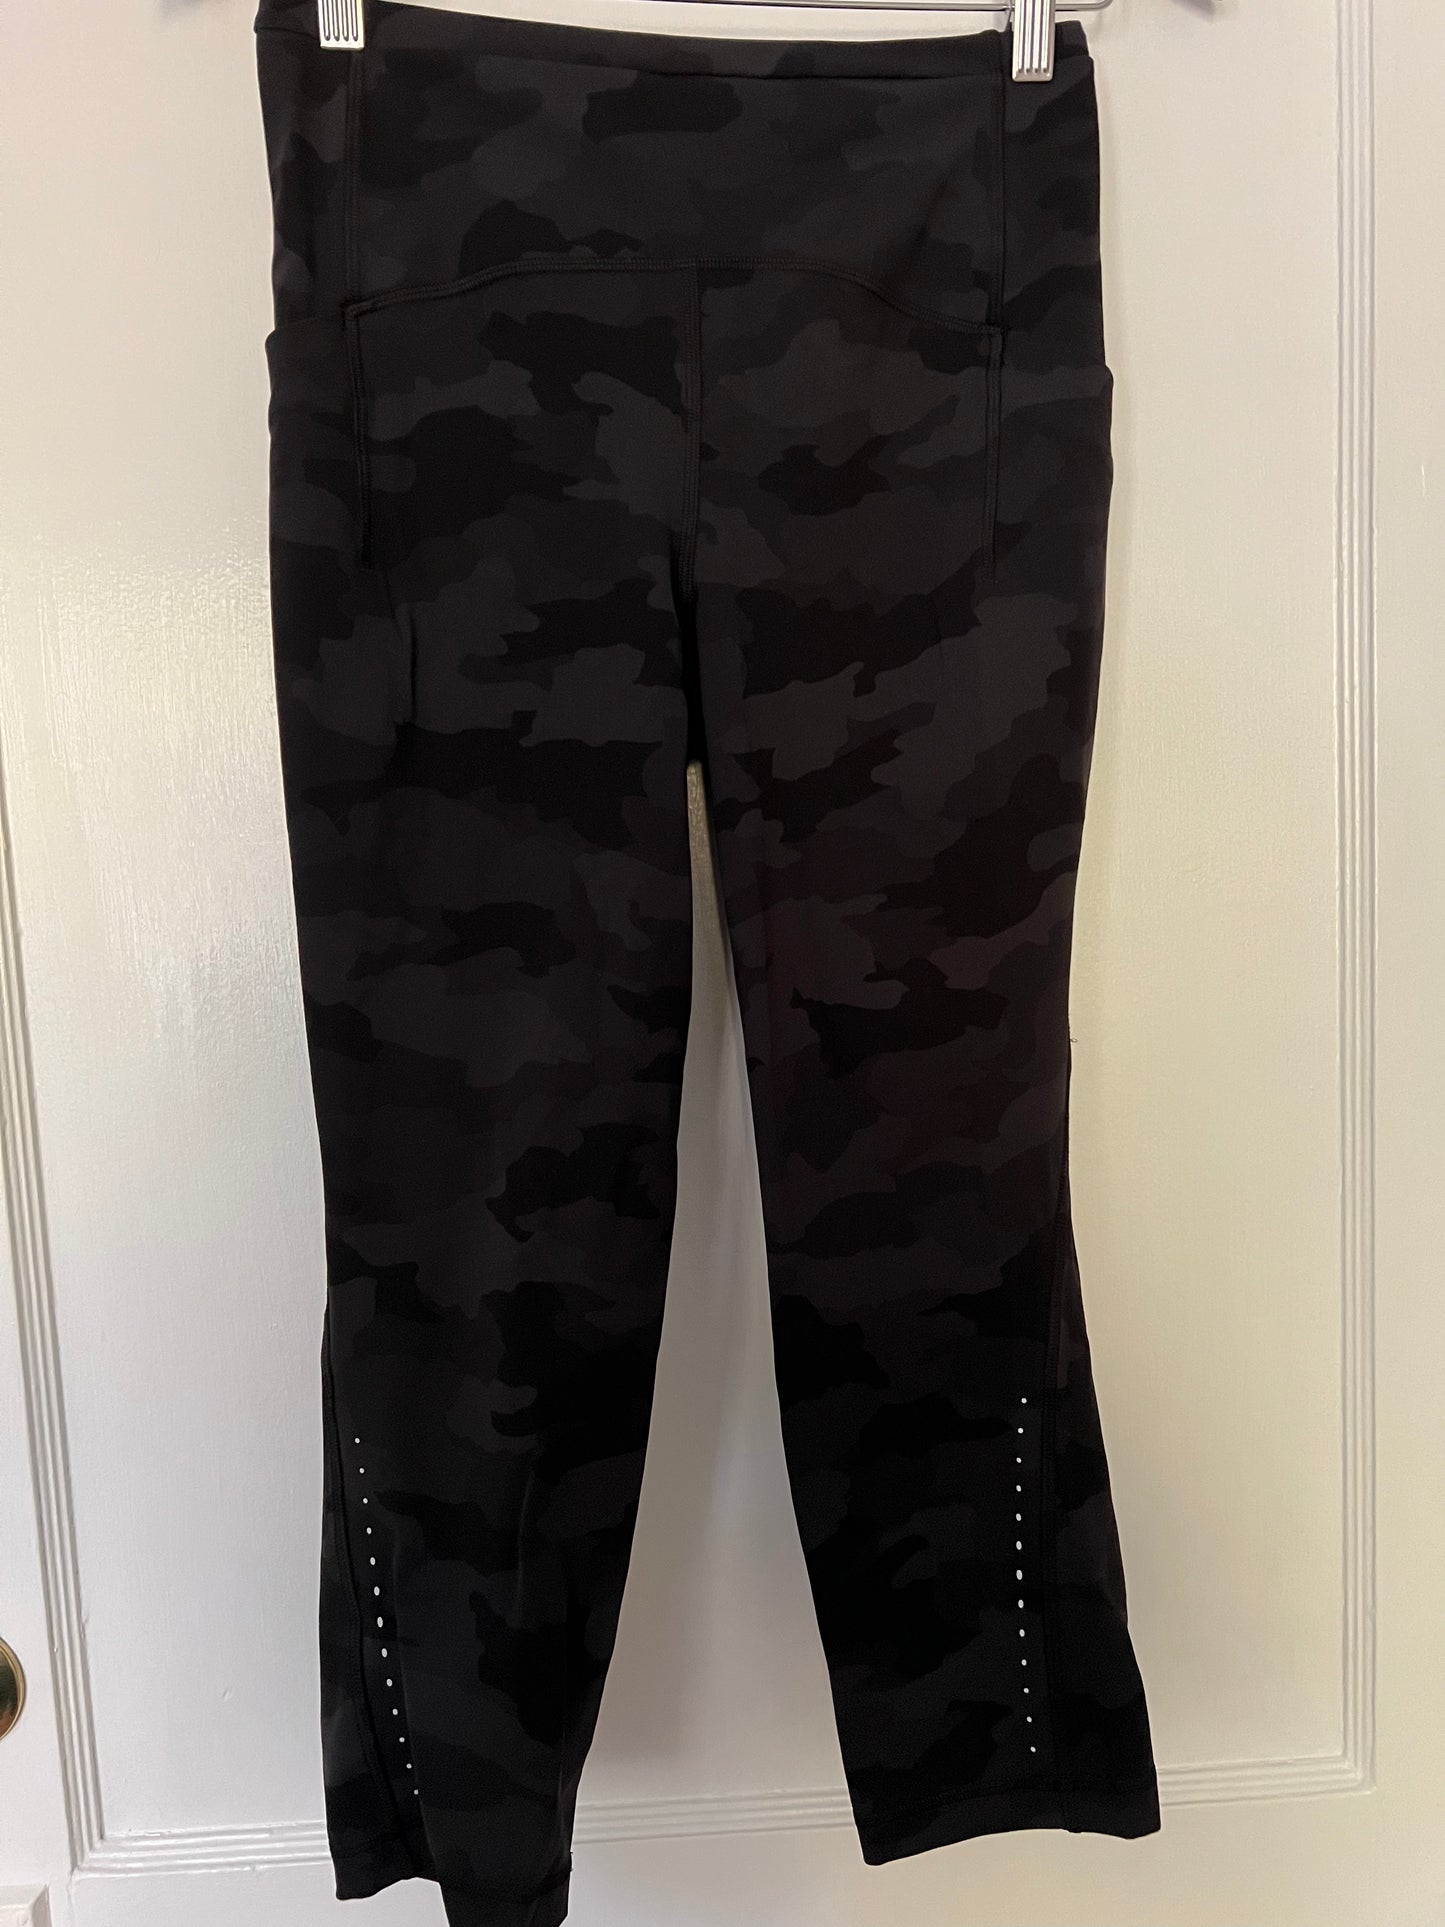 Lululemon Swift Speed High Rise Cropped Leggings 21" Camo Deep Coal Size 6 PPU 45208 or Spring Sale